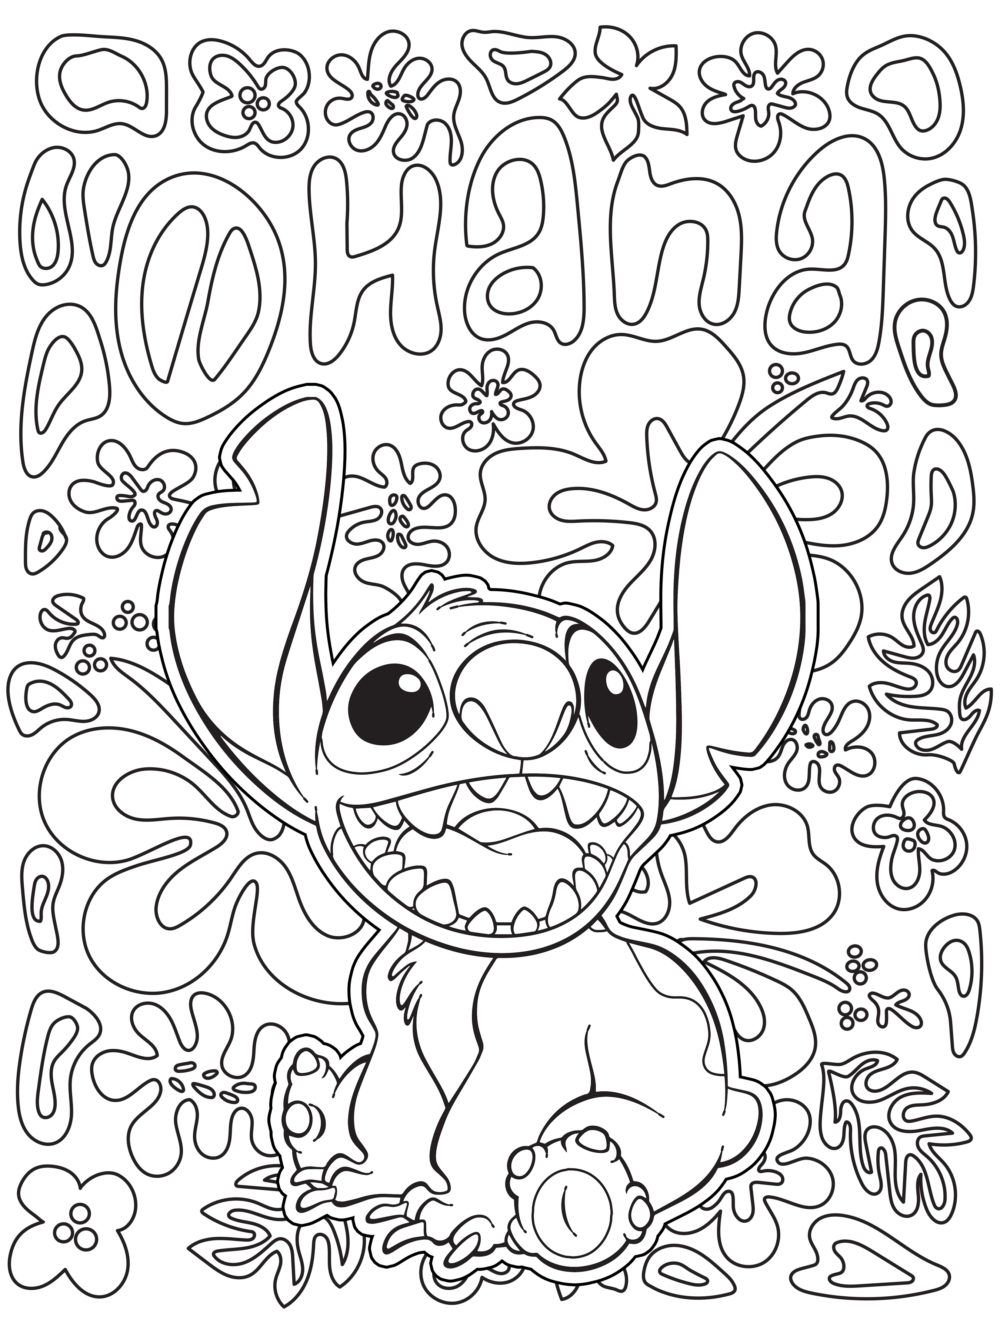 Coloring Disney Pages Disney Coloring Pages For Adults Best Coloring Pages For Kids